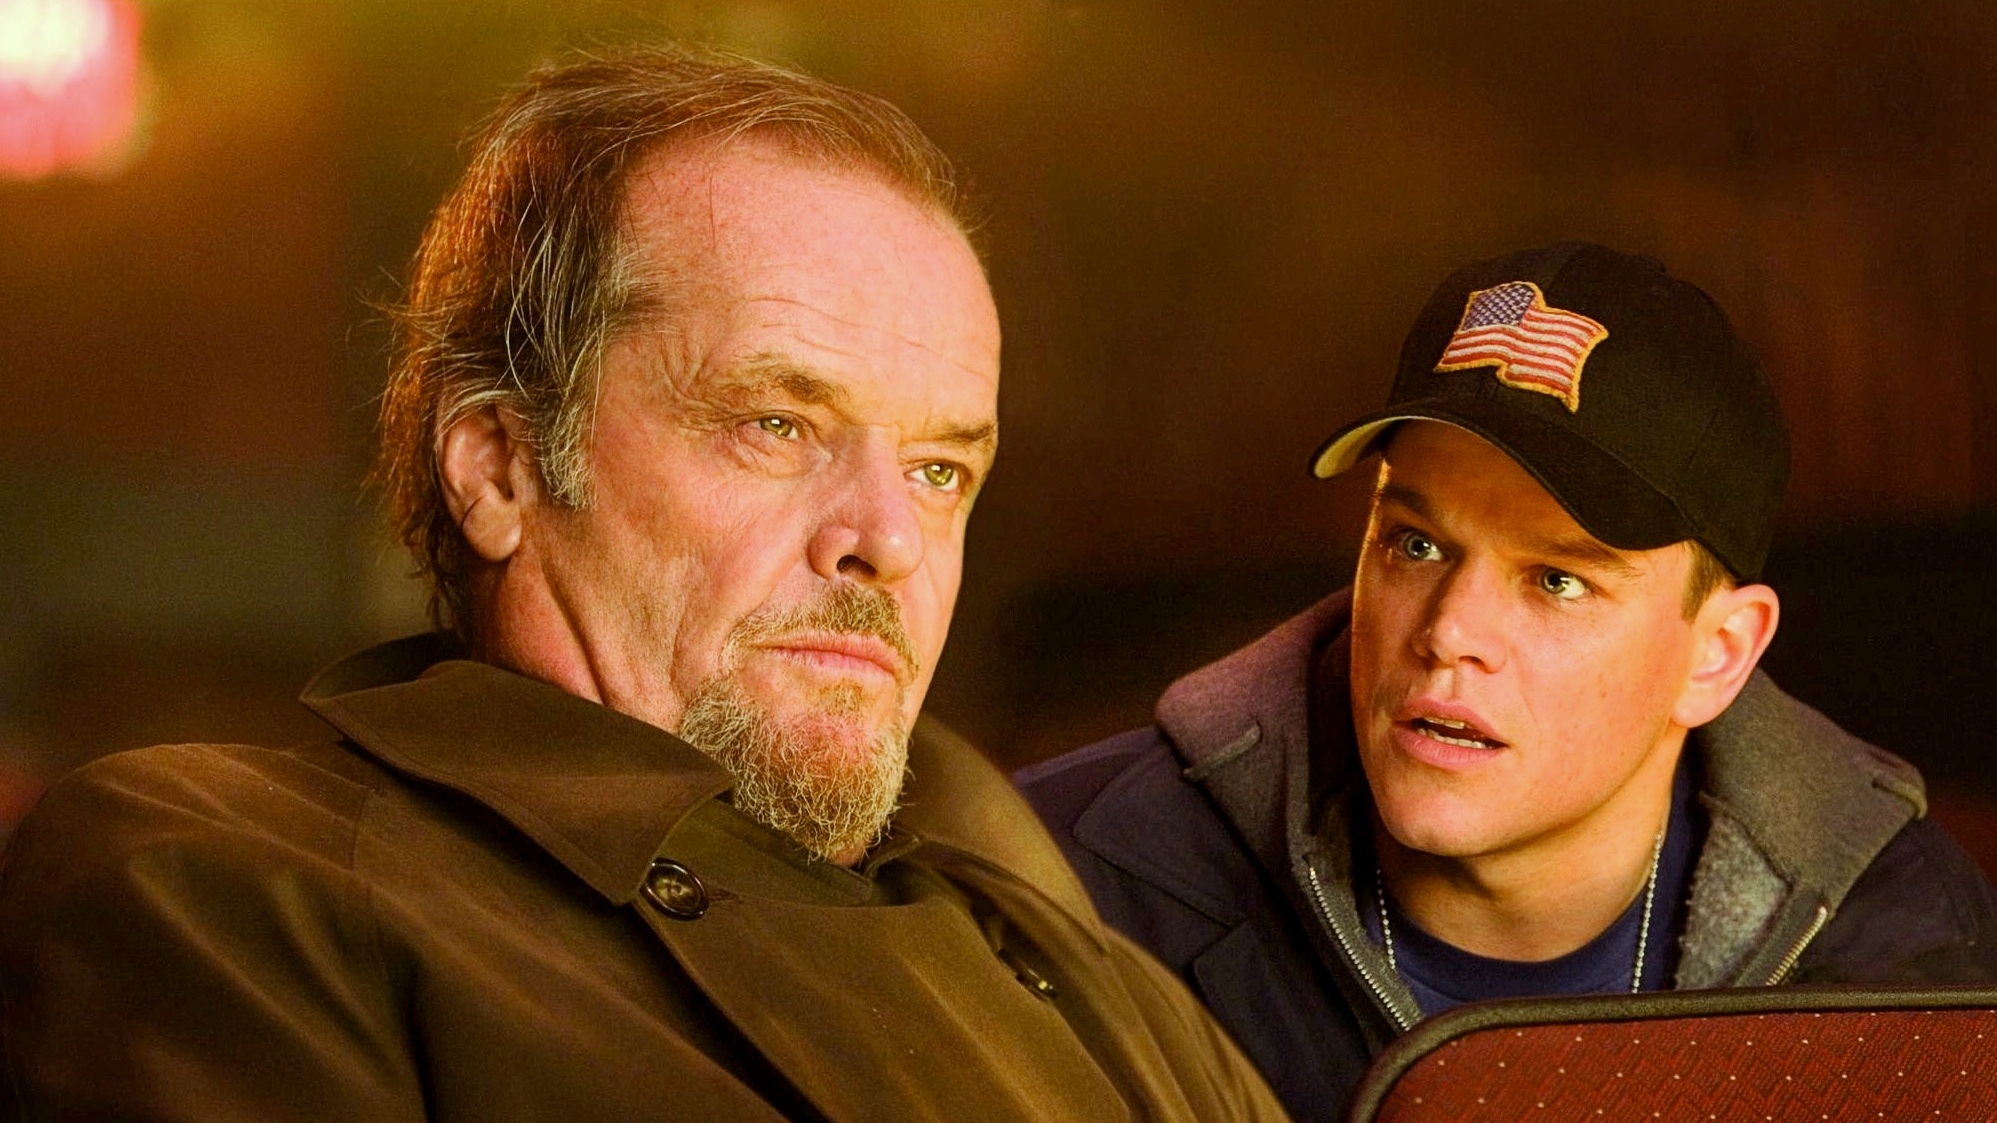 A still from The Departed featuring Matt Damon and Jack Nicholson in a movie theater.